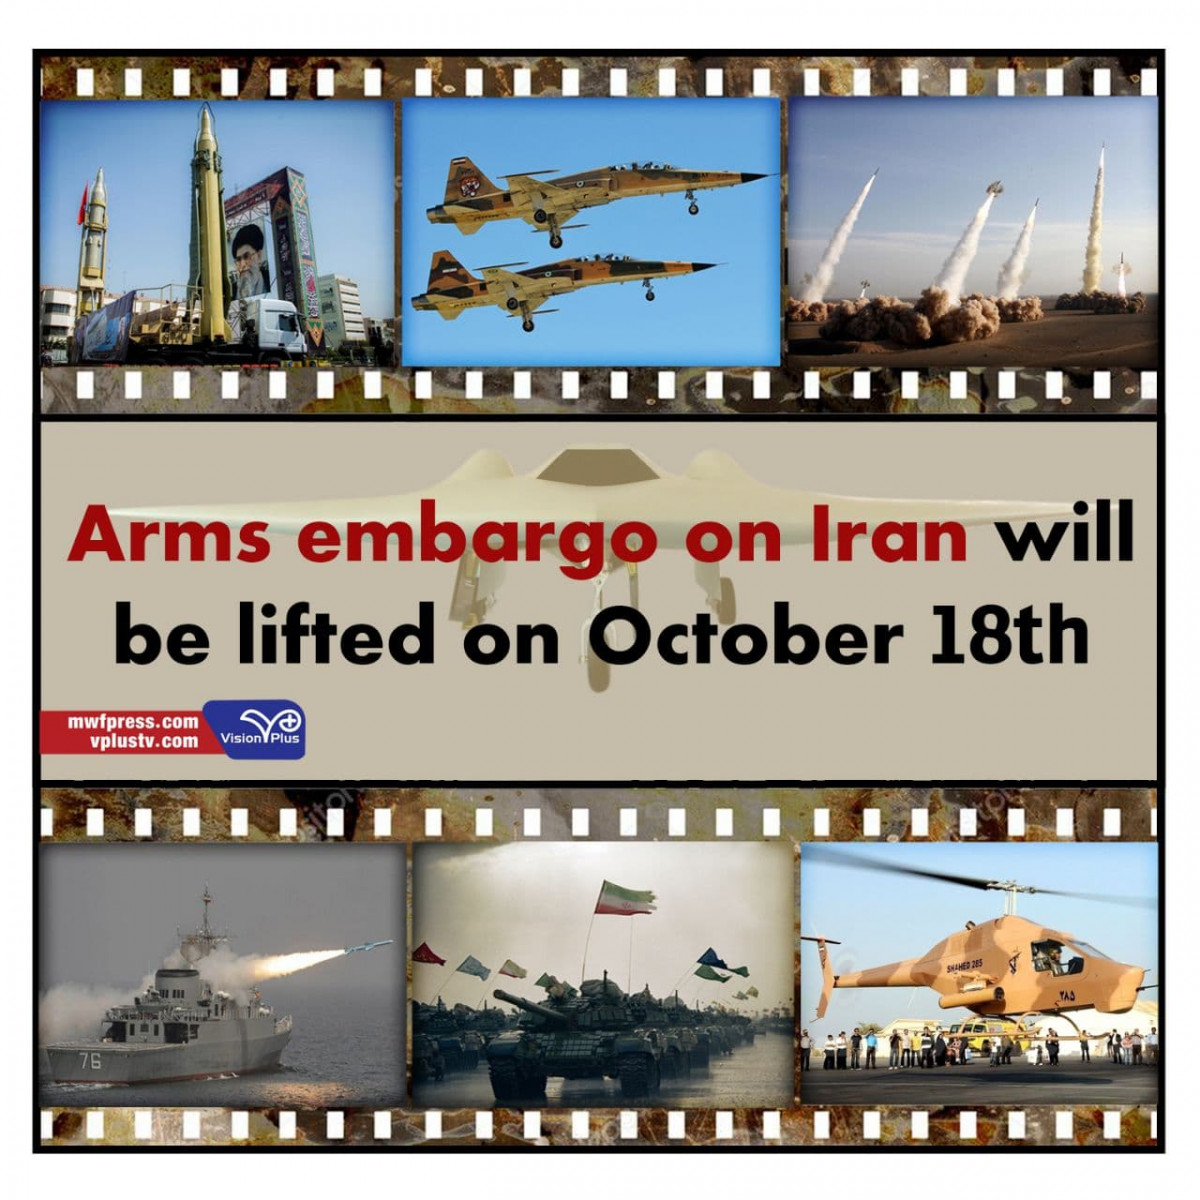 Arms embargo on Iran will be lifted on October 18th